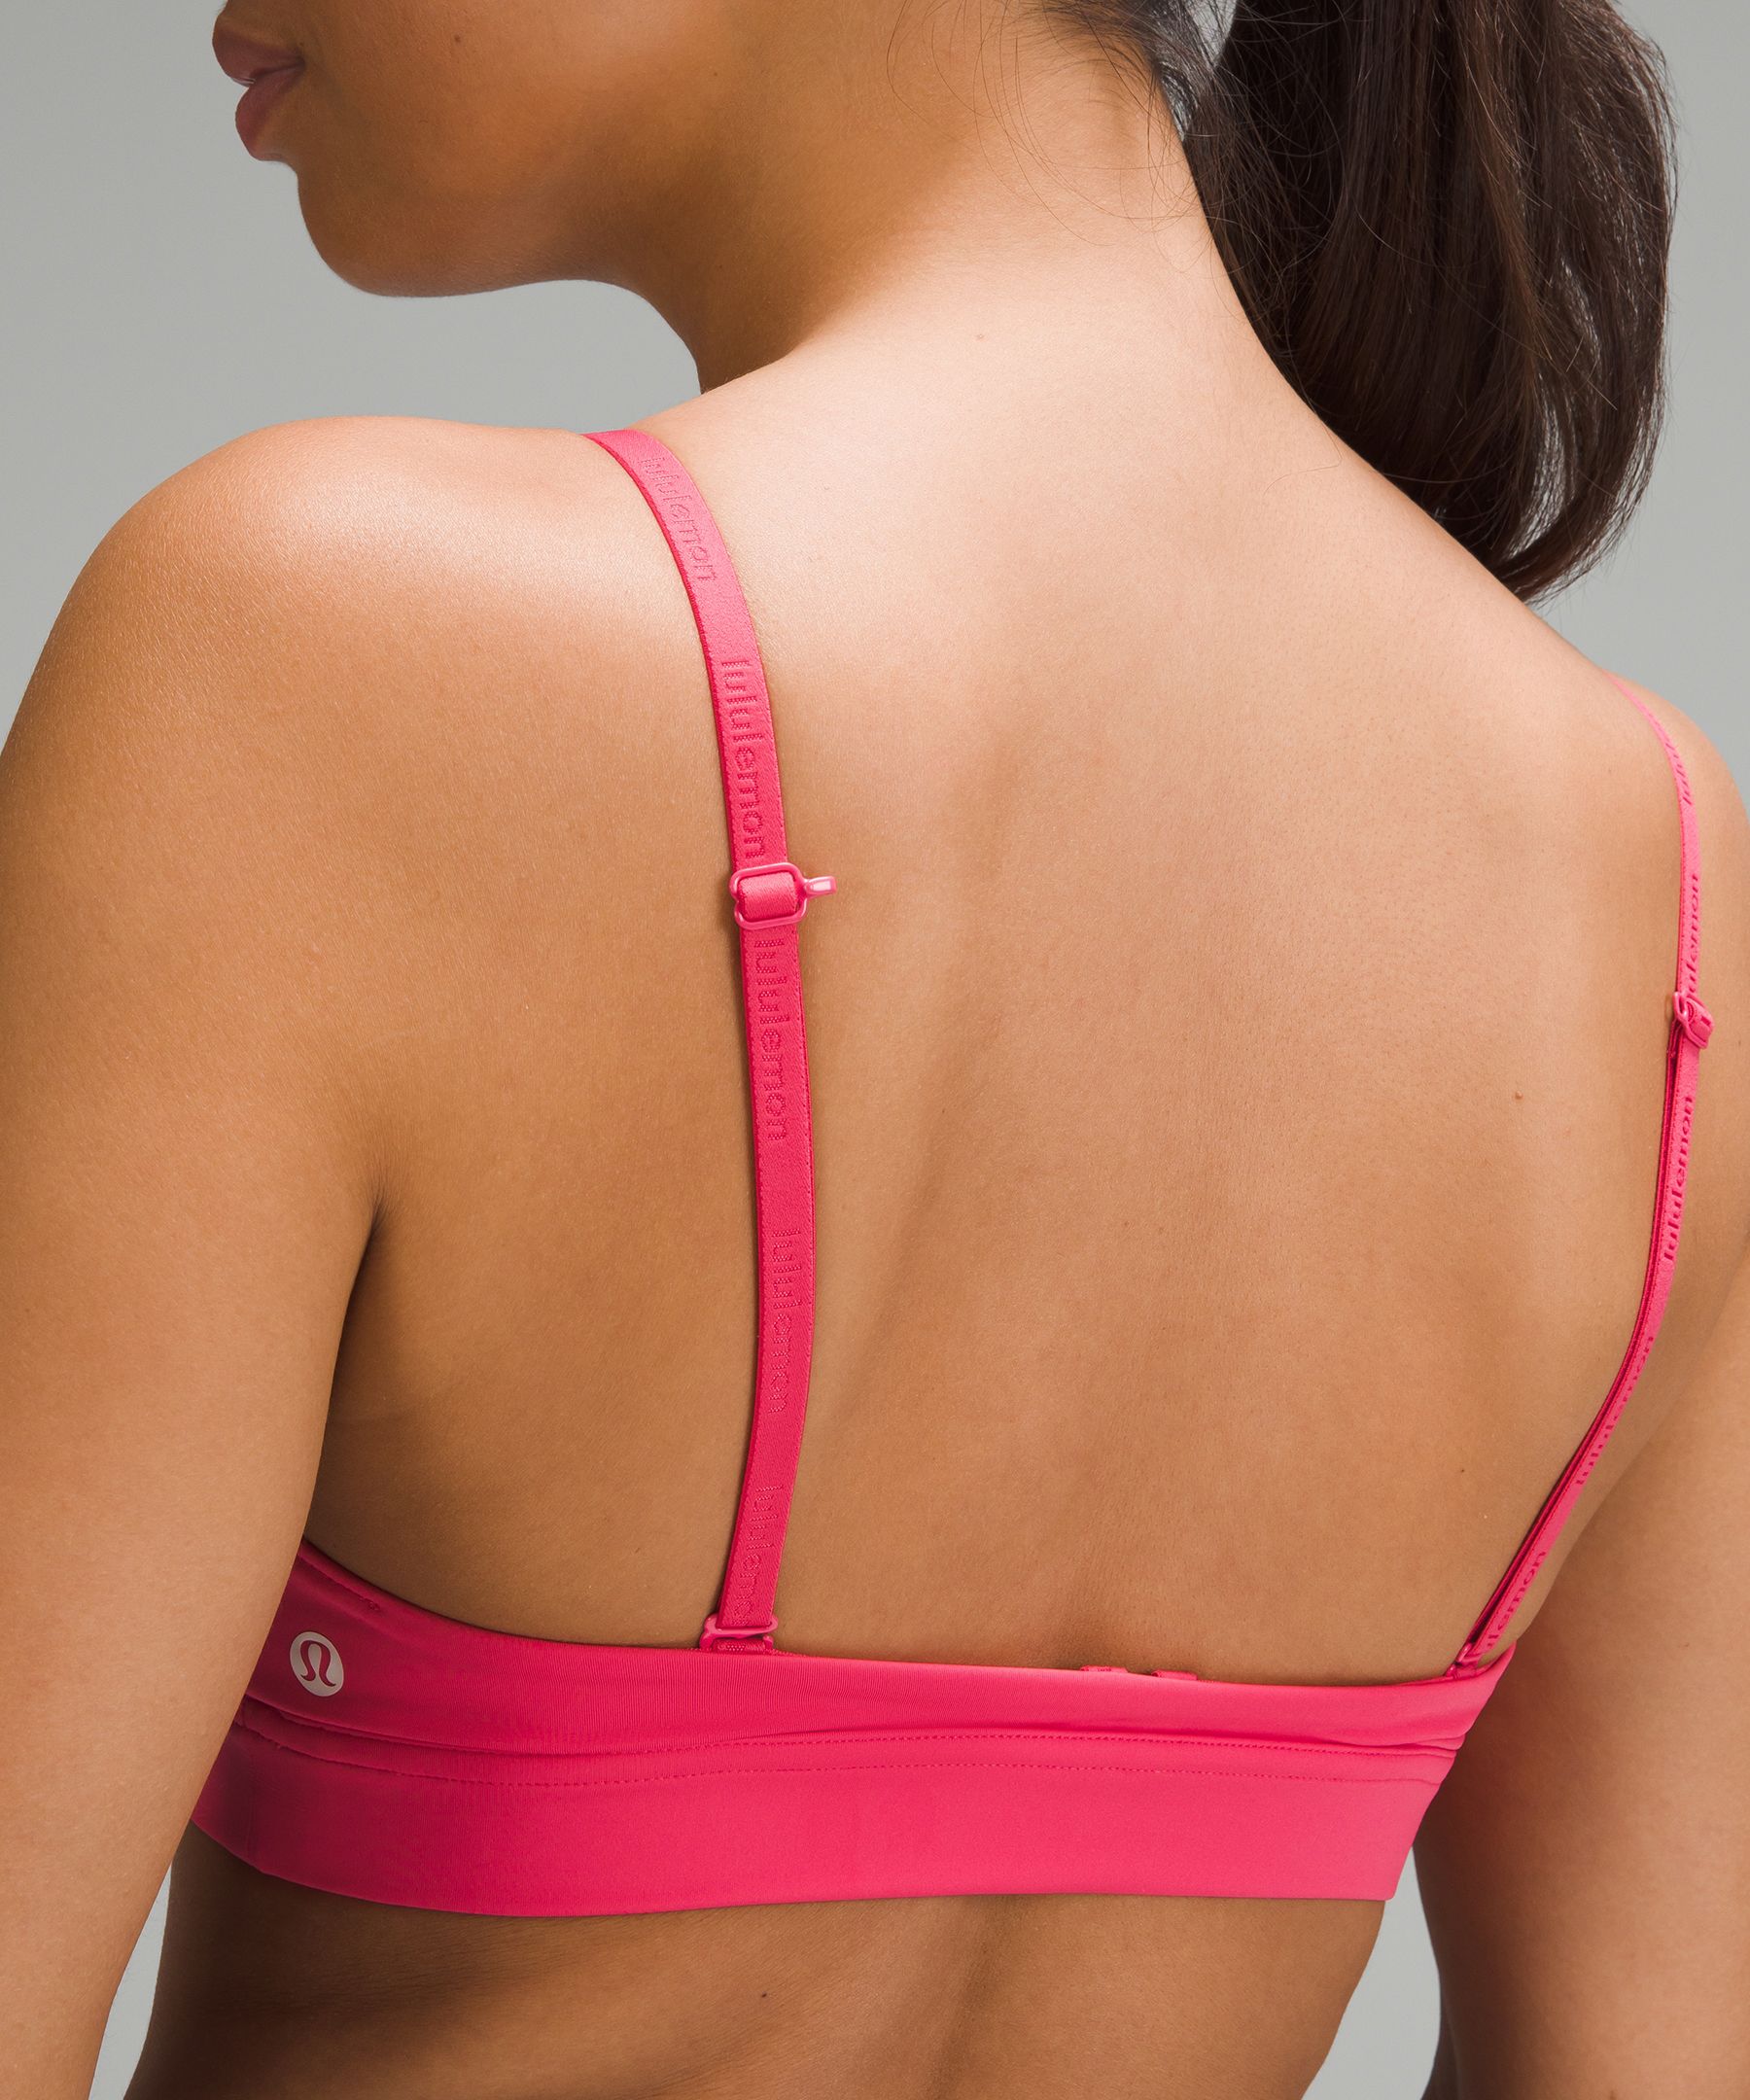 License to Train Triangle Bra Light Support, A/B Cup *Graphic